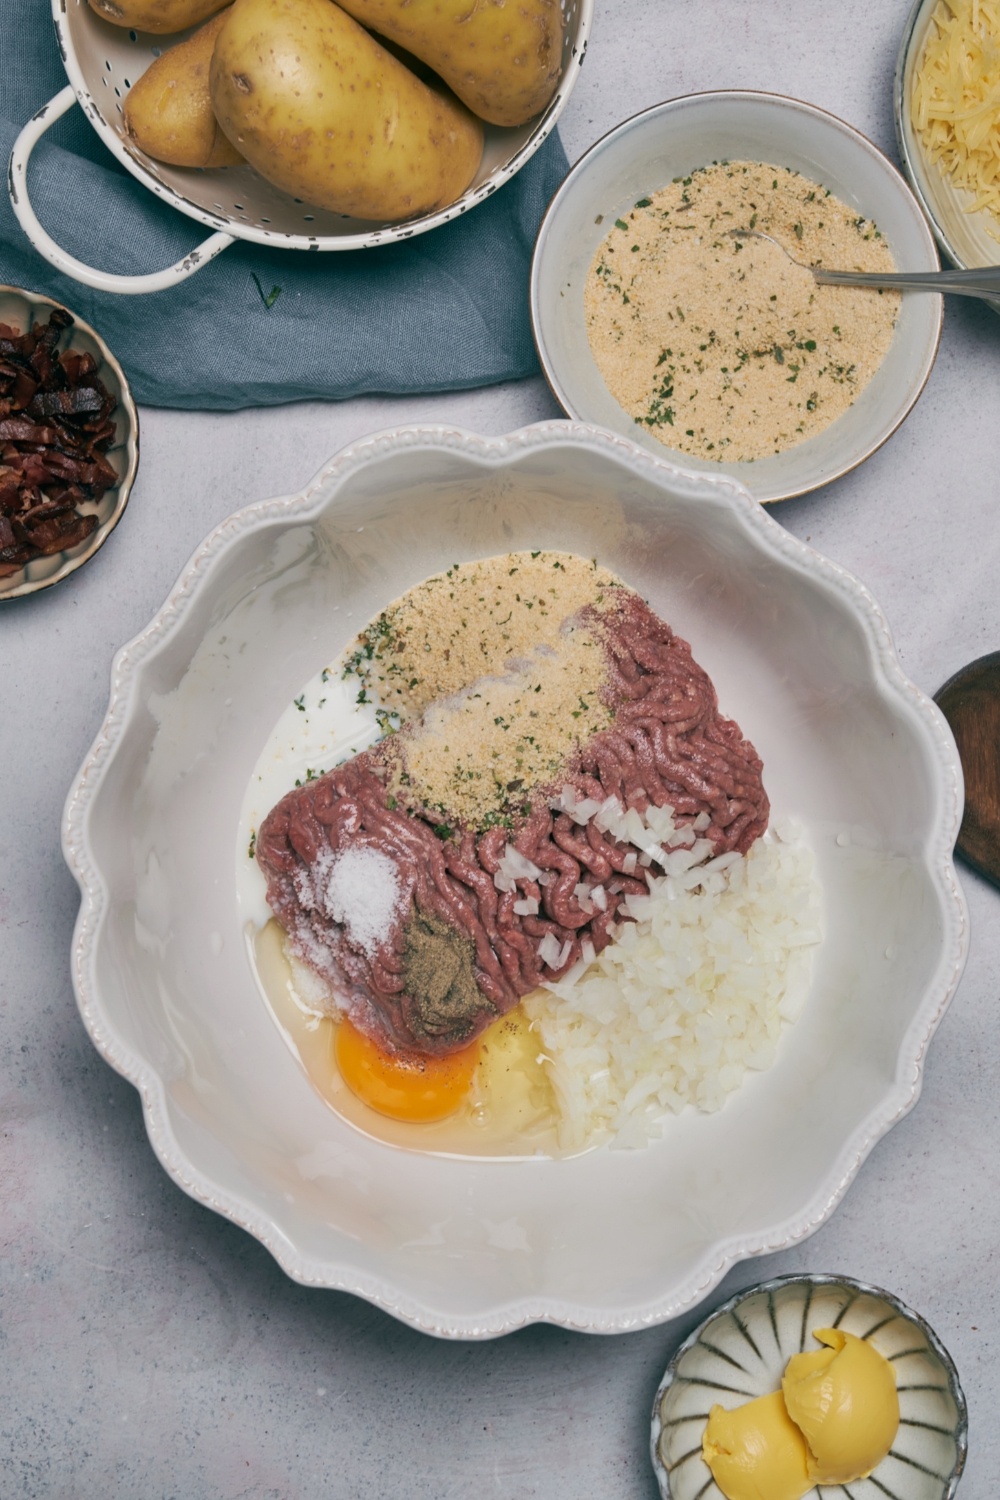 Ground meat, spices, a cracked egg, and onion in a white bowl.